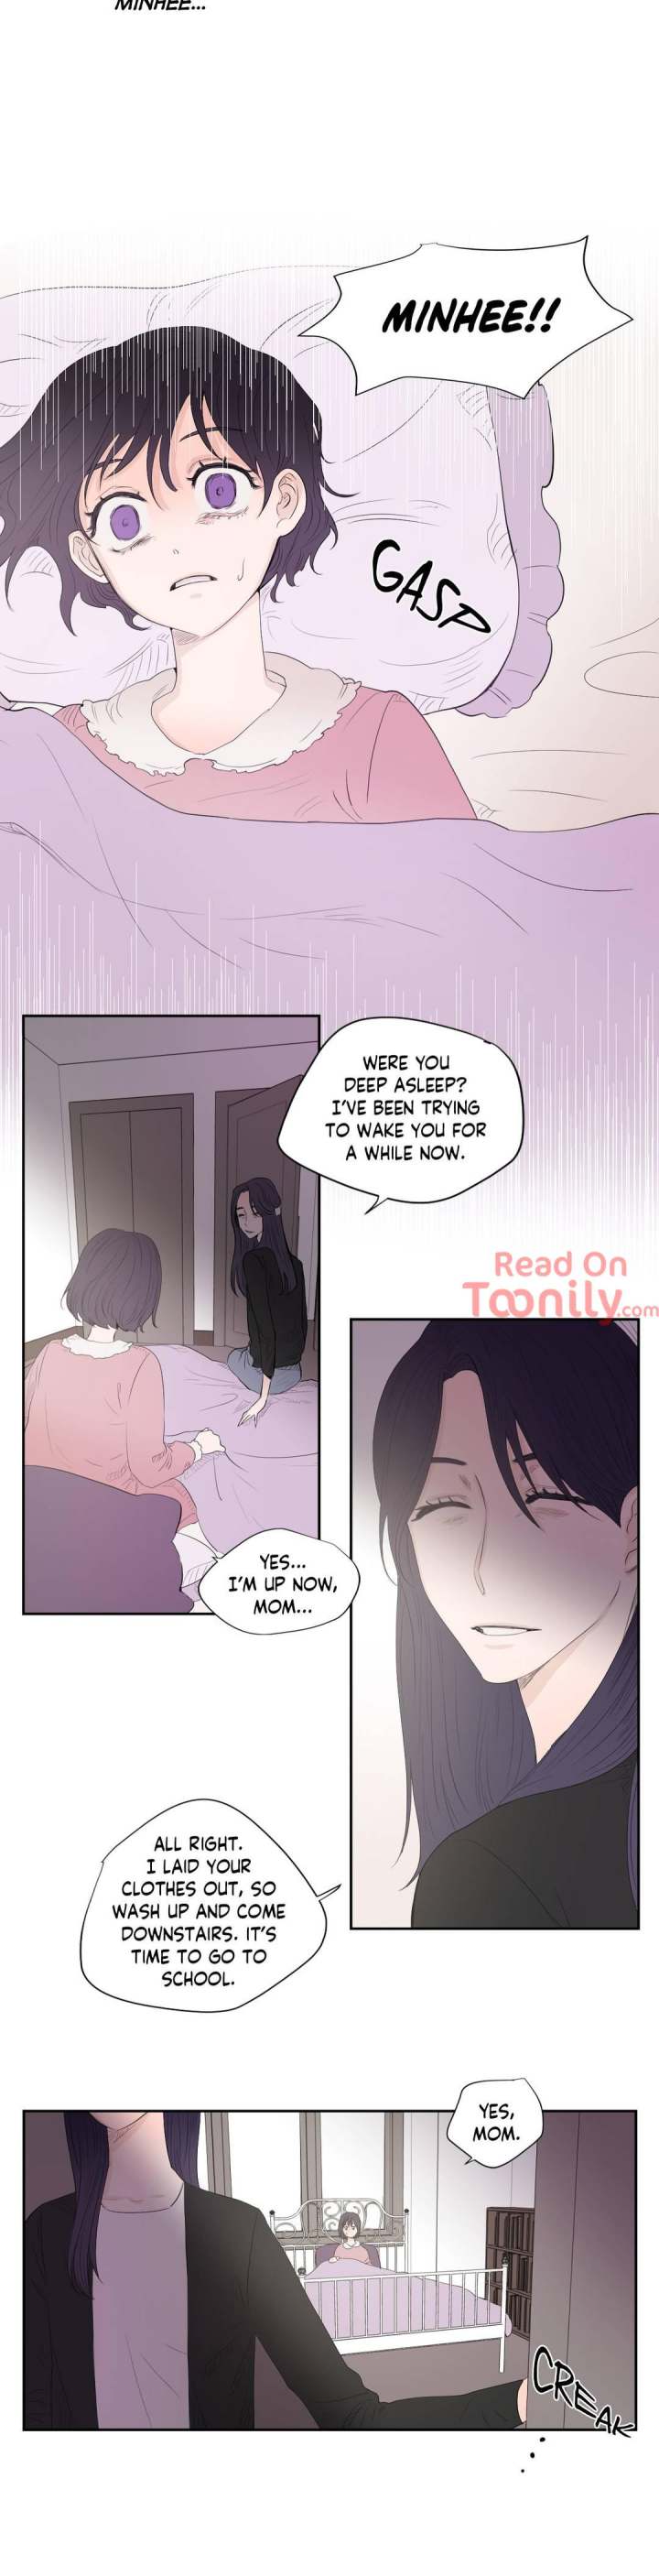 Broken Melody - Chapter 3 Page 2